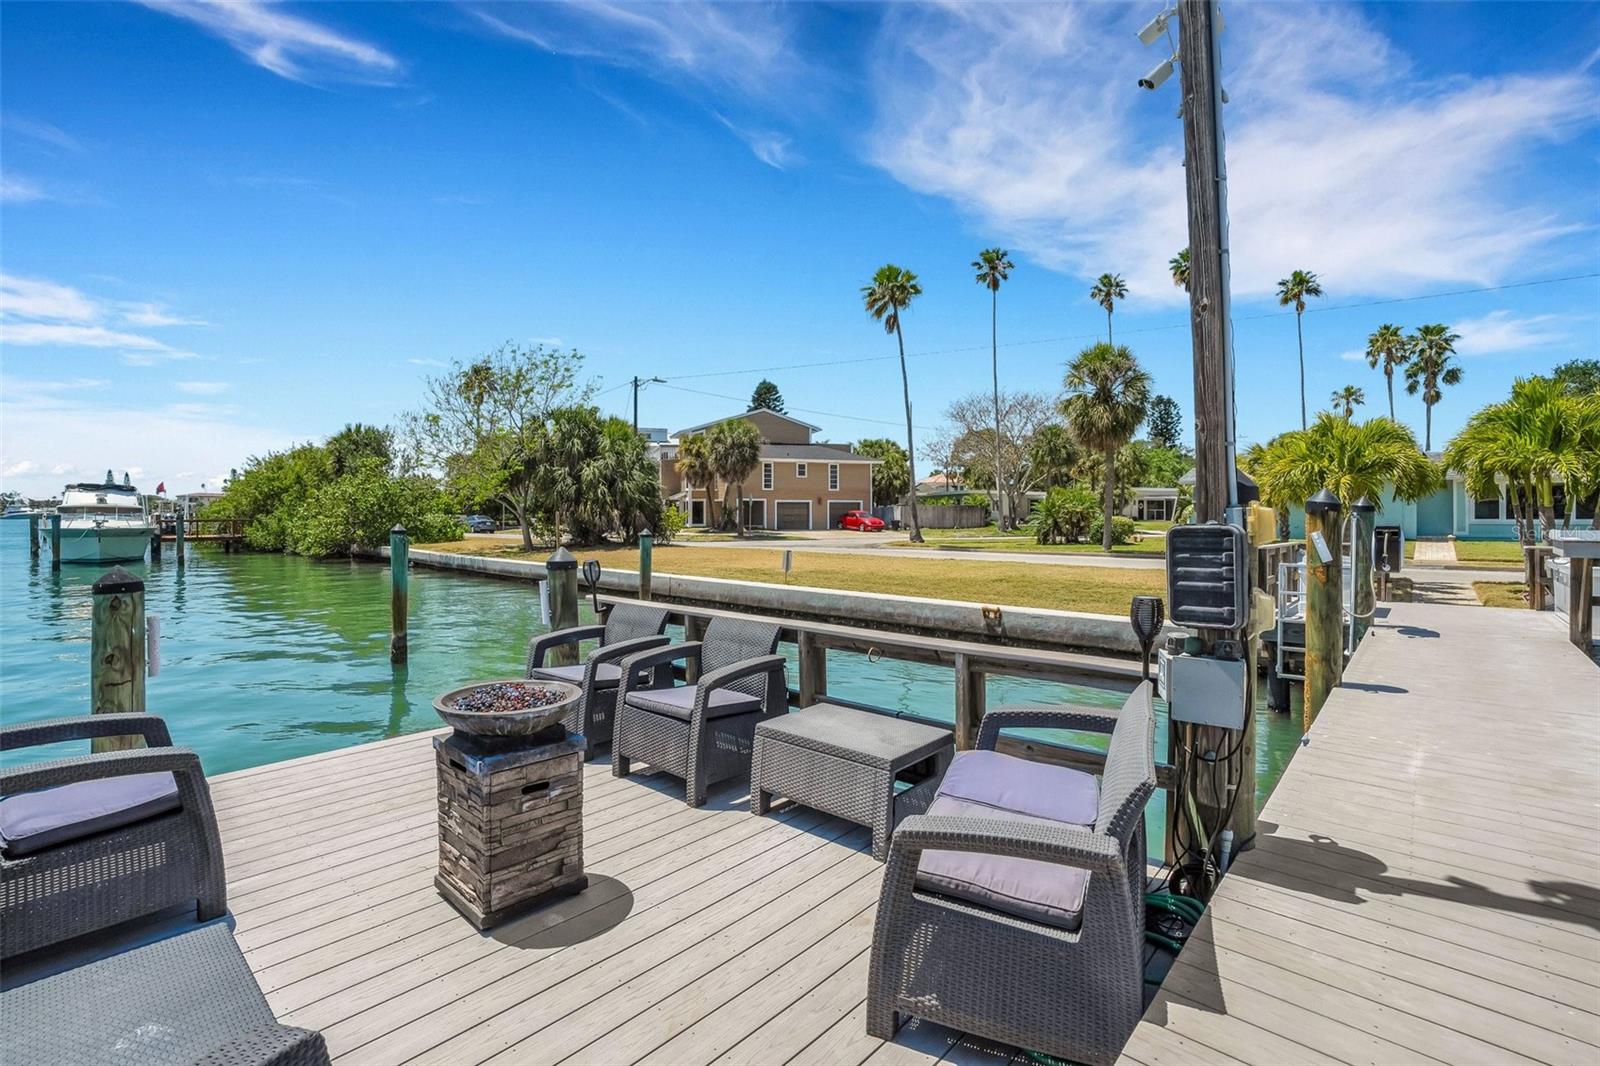 Extra Large, multi level deck to optimize your viewing of dolphins, manatees and you can even fish right off the dock.  Make from Trex Composite Deck Boards so it won't rot like wood